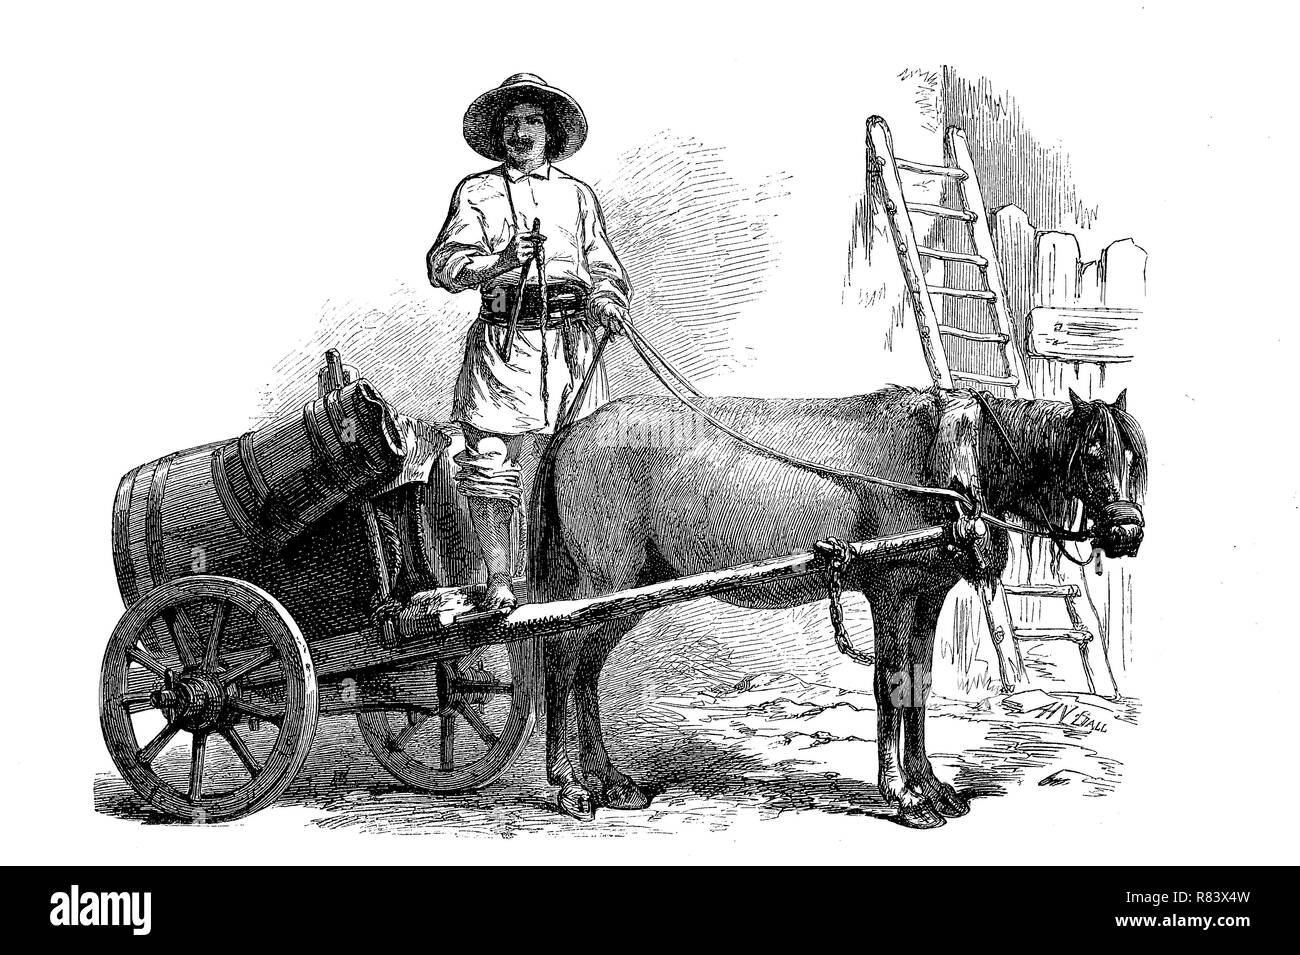 Digital improved reproduction, a man selling water in the region of Wallachia or Walachia, Romania, WasserverkÃ¤ufer in der Walachei, RumÃ¤nien, from an original print from the year 1855 Stock Photo